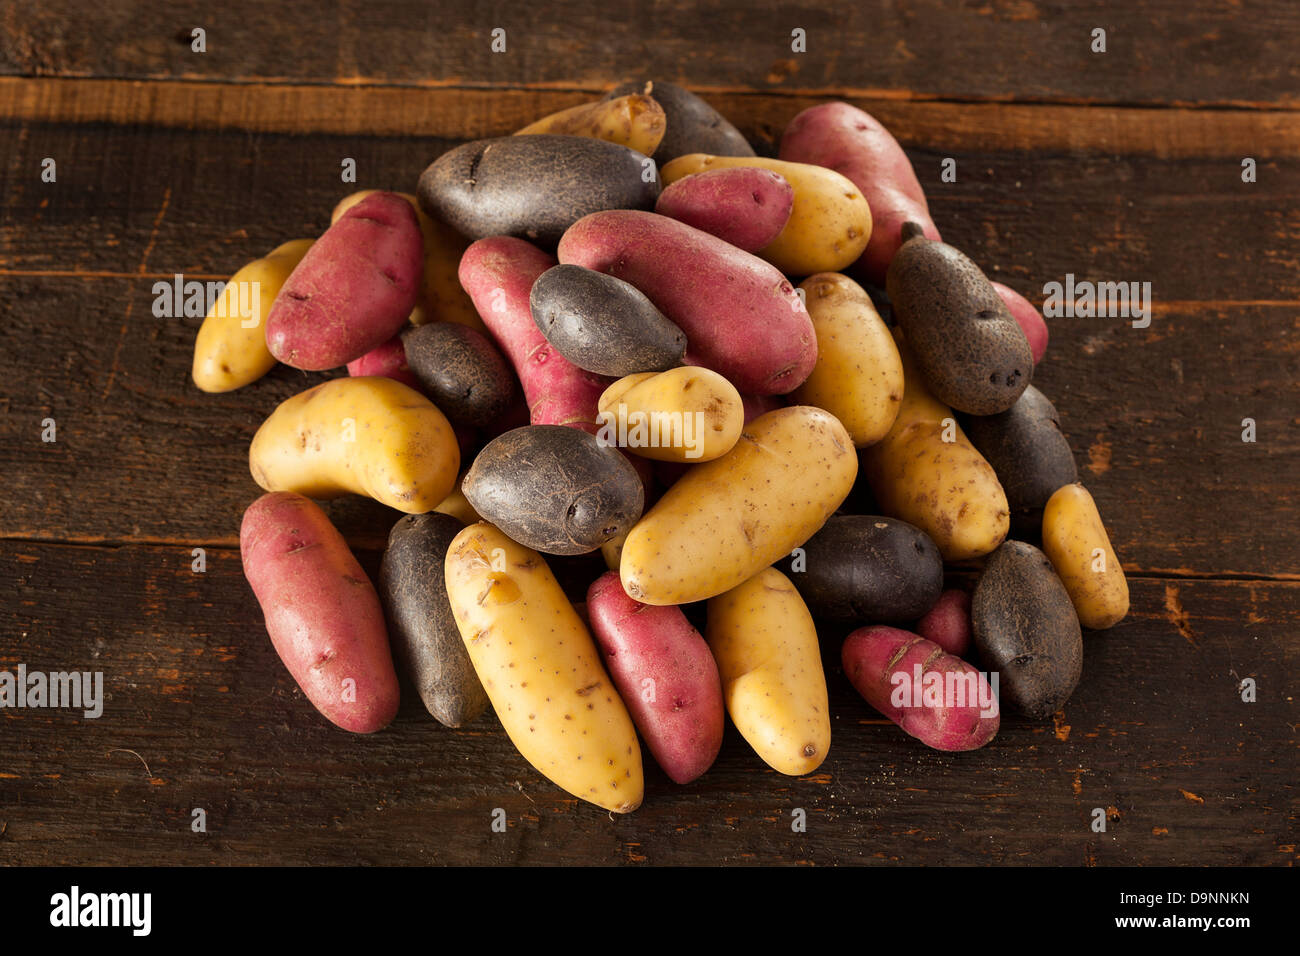 raw organic fingerling potato medley against a background Stock Photo